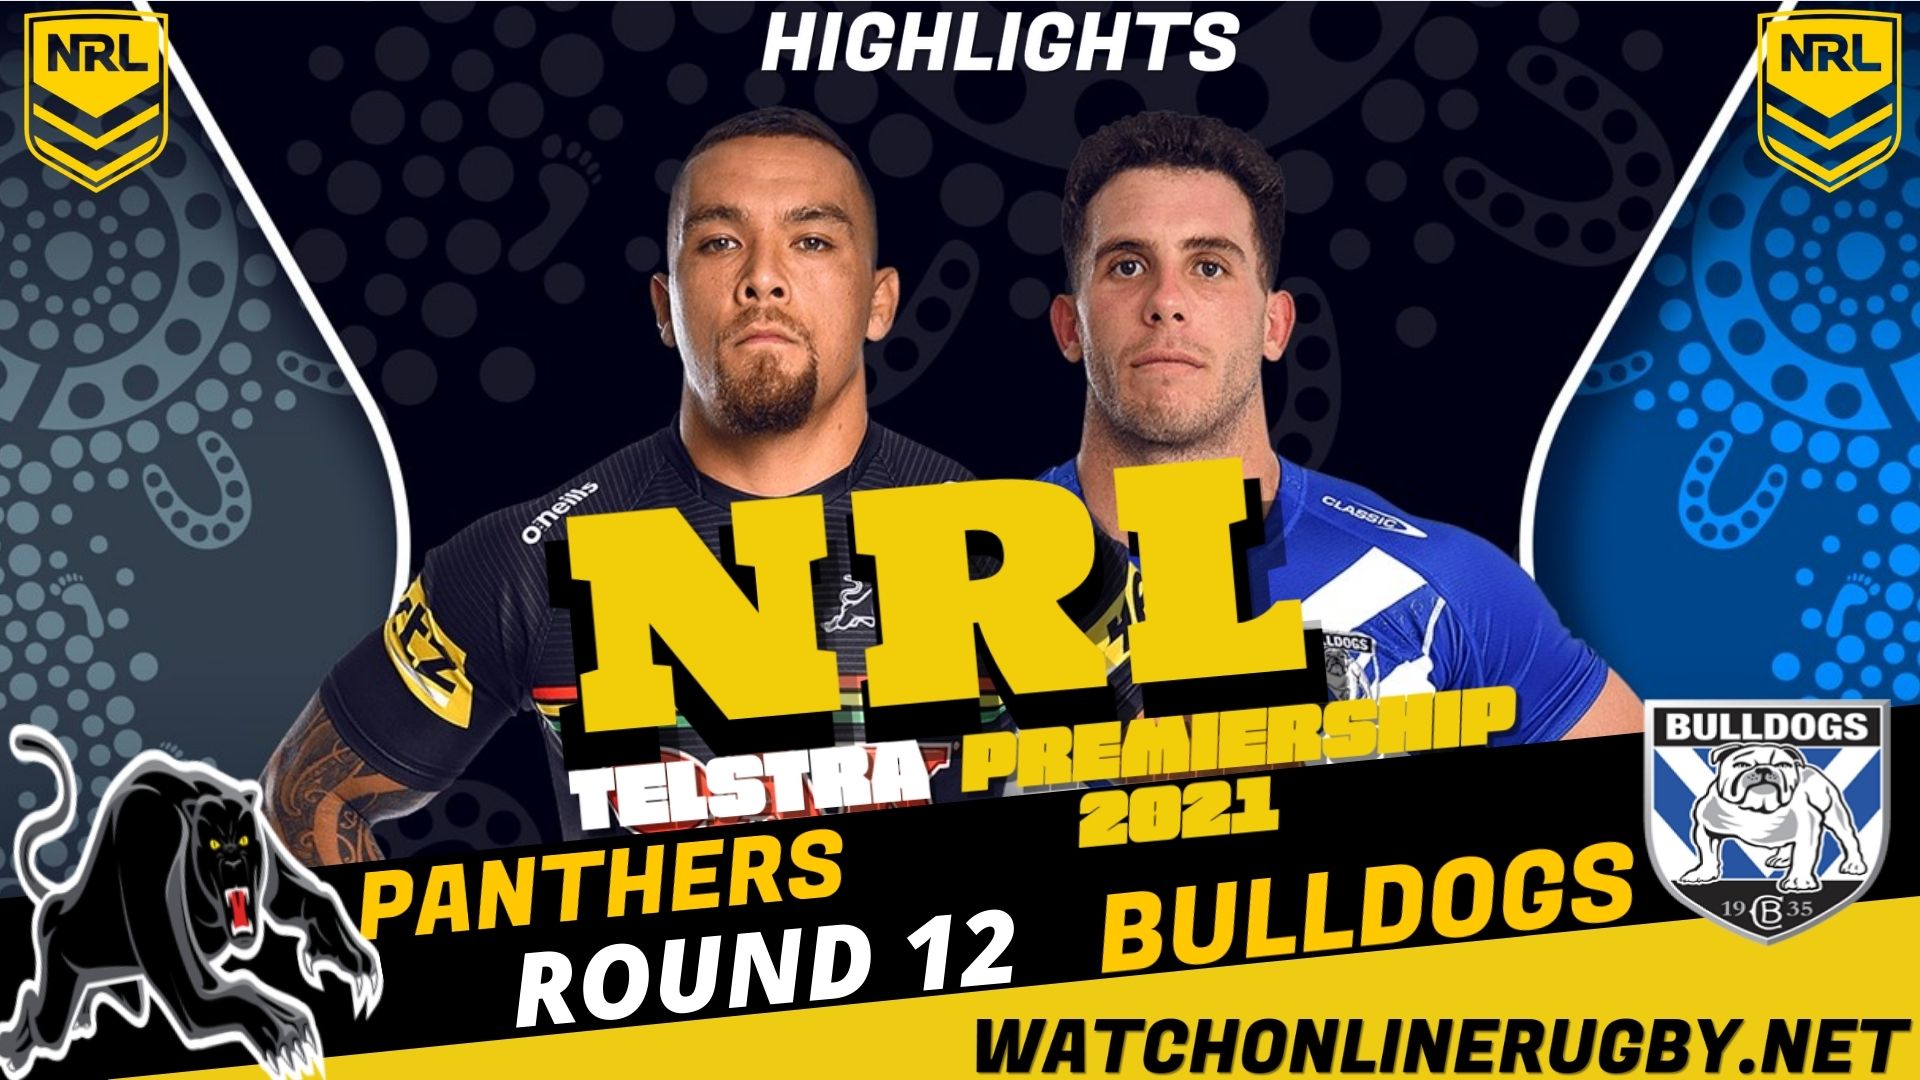 Panthers Vs Bulldogs Highlights RD 12 NRL Rugby